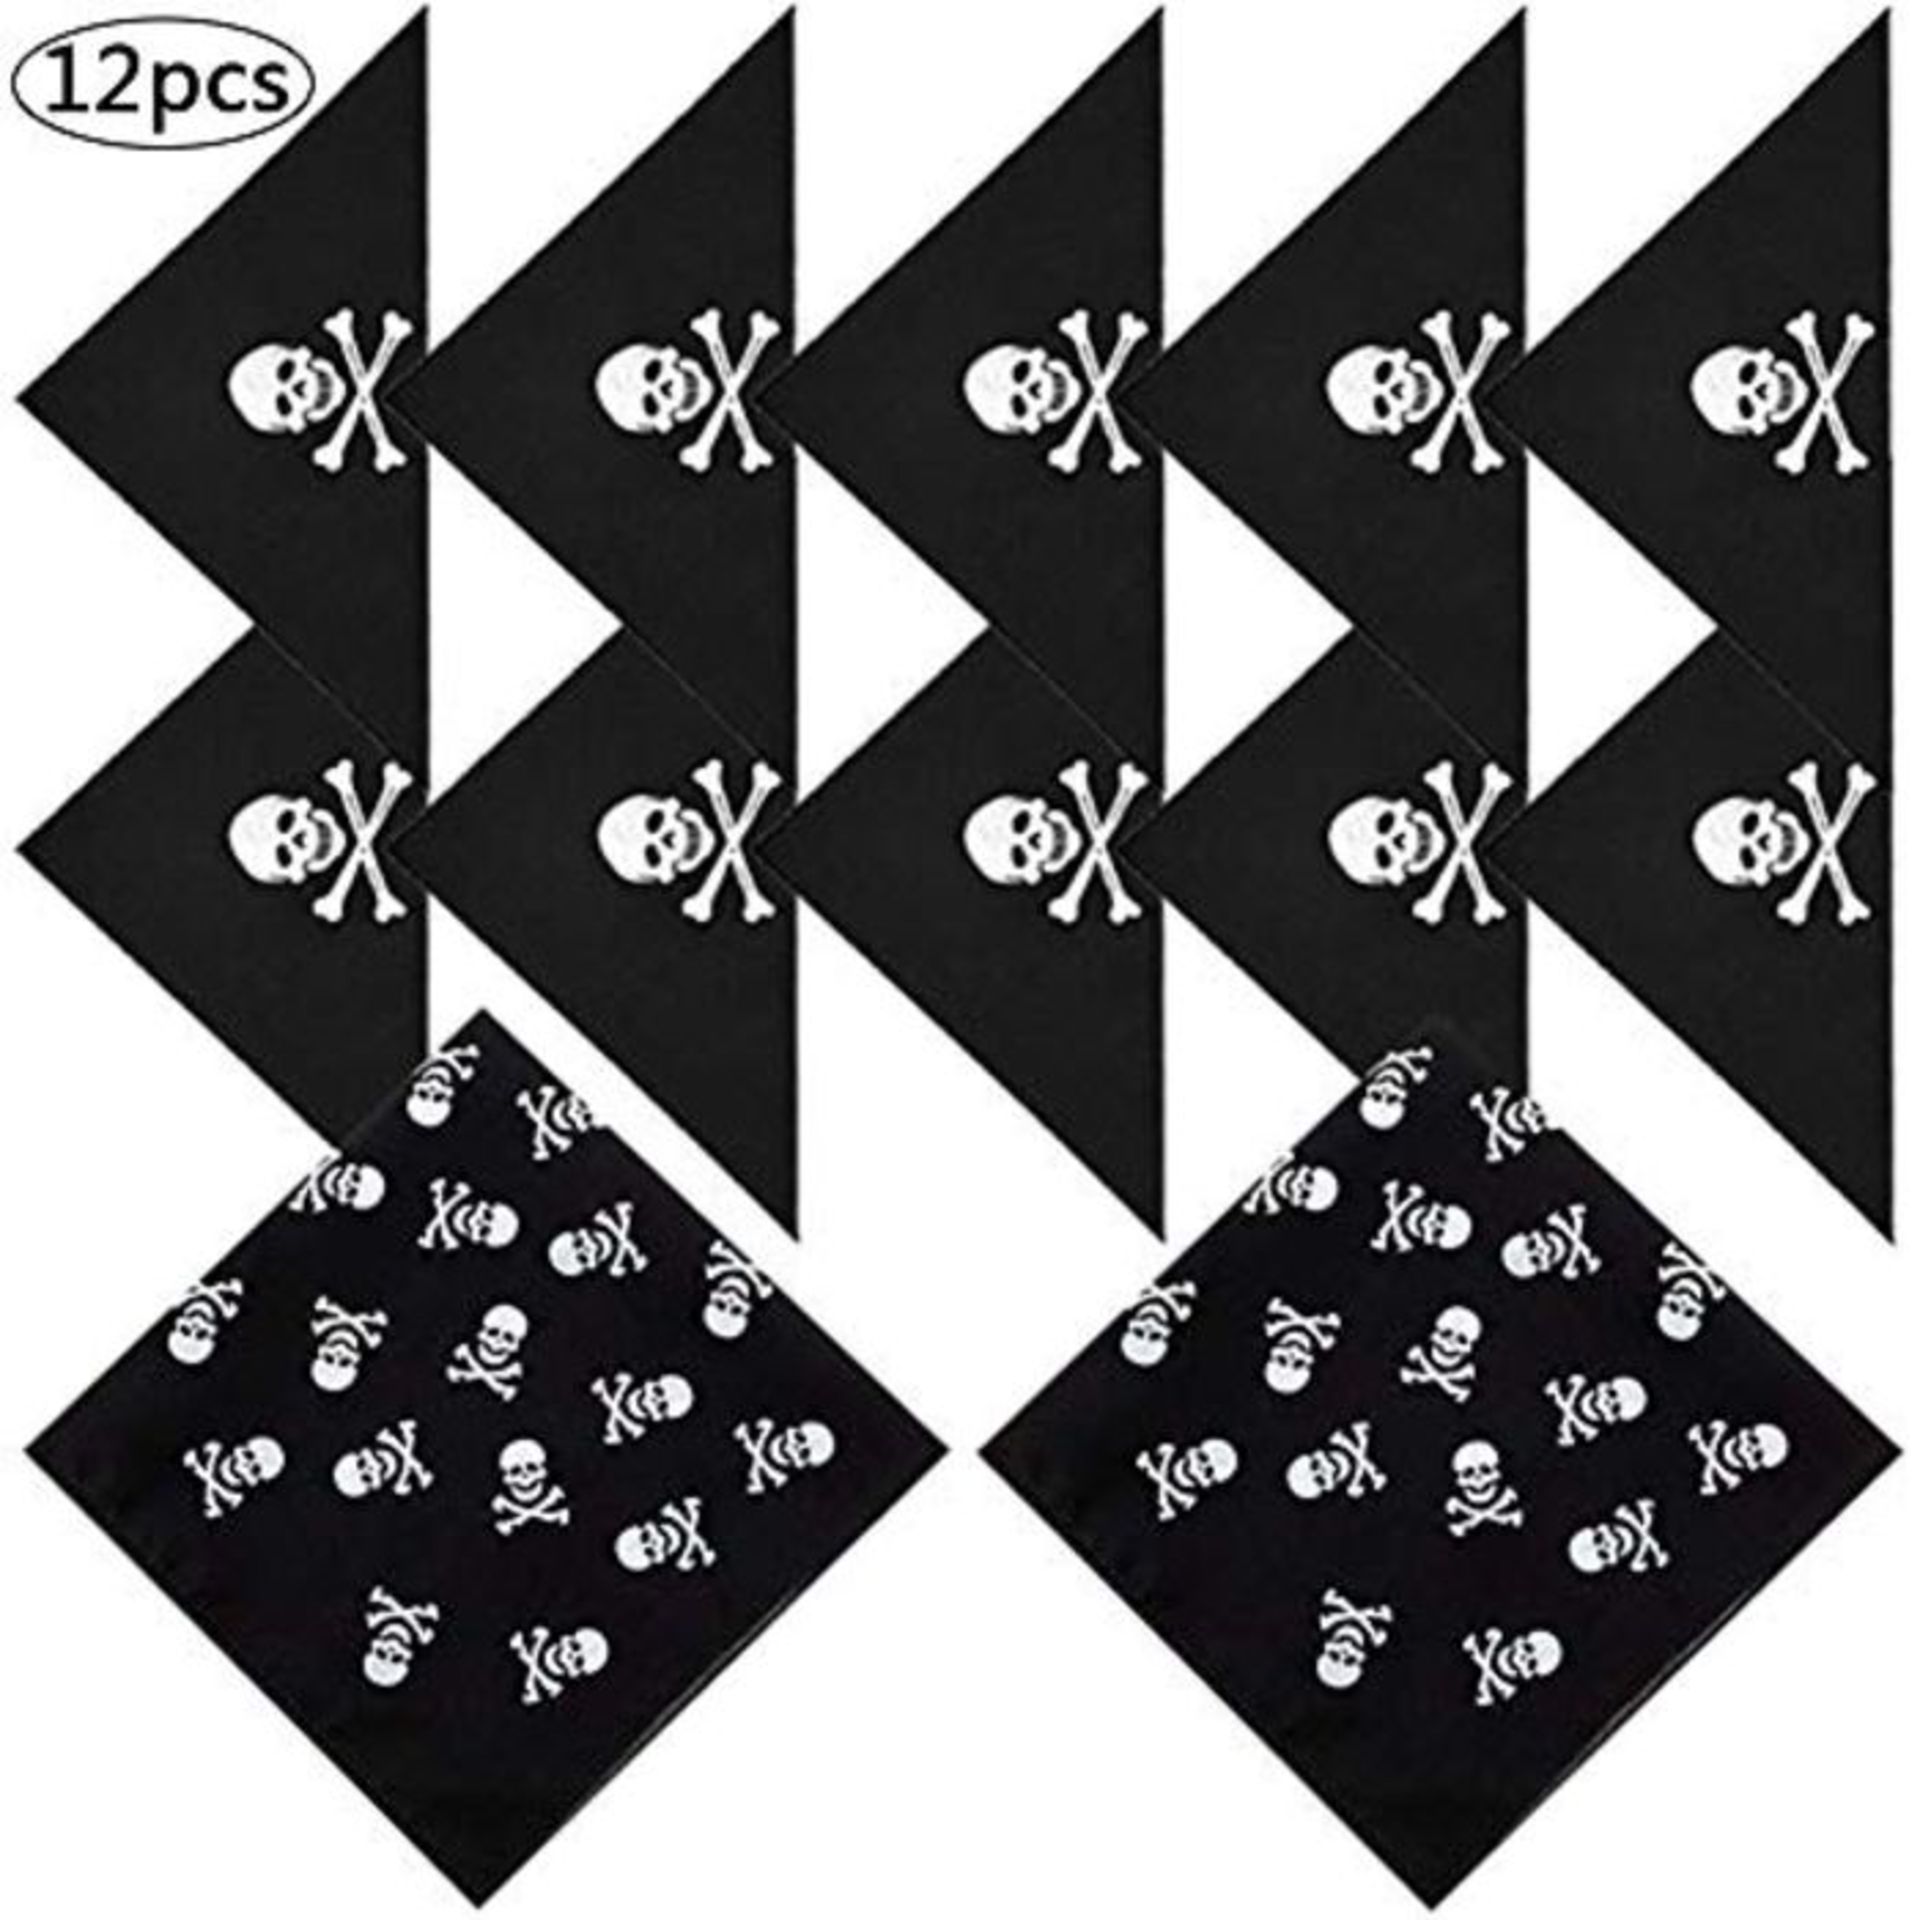 BESTZY 12 Pack Pirate Bandana Black Pirate Captain's Headscarf for Pirate Theme Party,